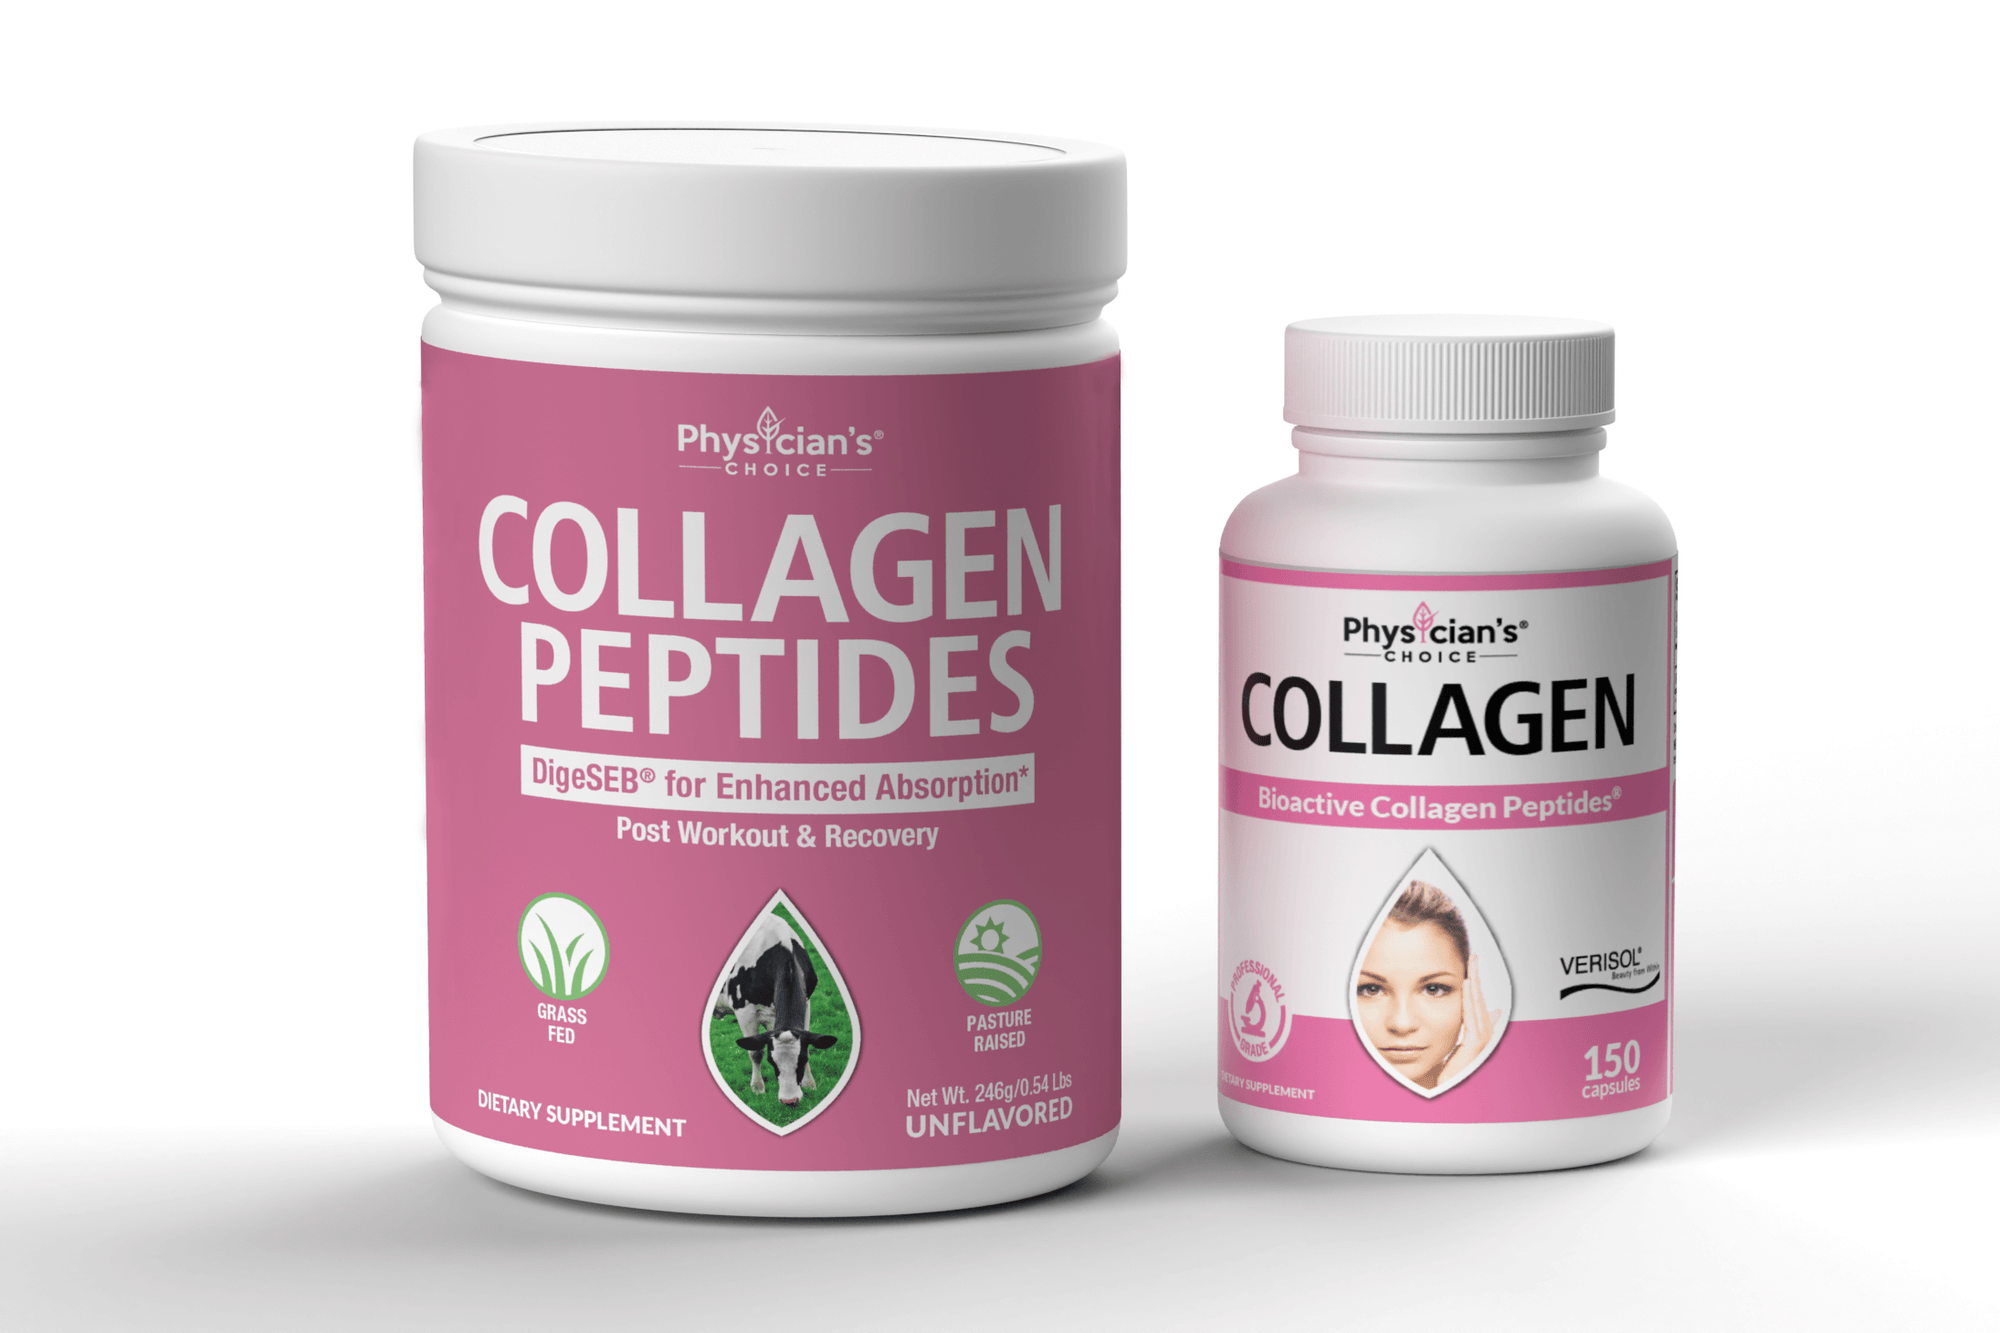 Physician's Choice Collagen Peptides and Verisol Collagen Capsules